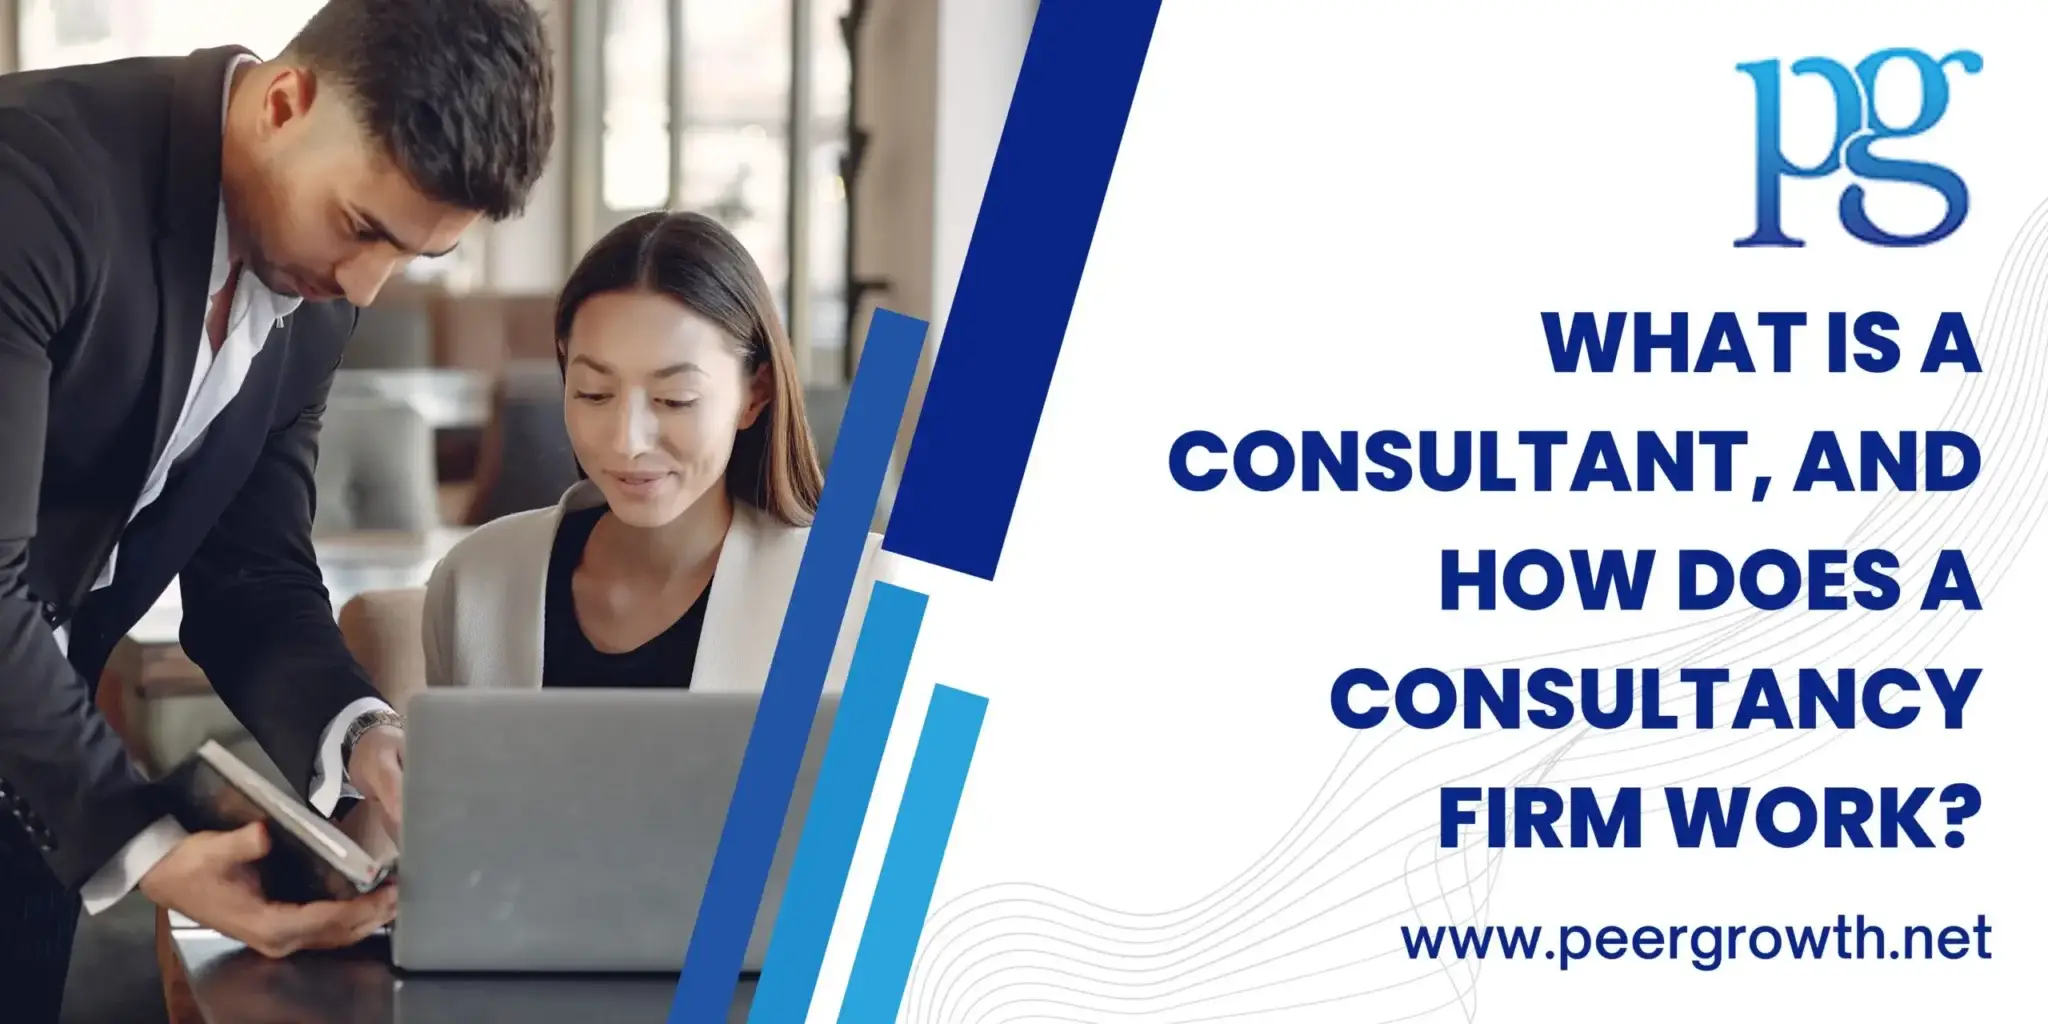 What is a Consultant, and How Does a Consultancy Firm Work?